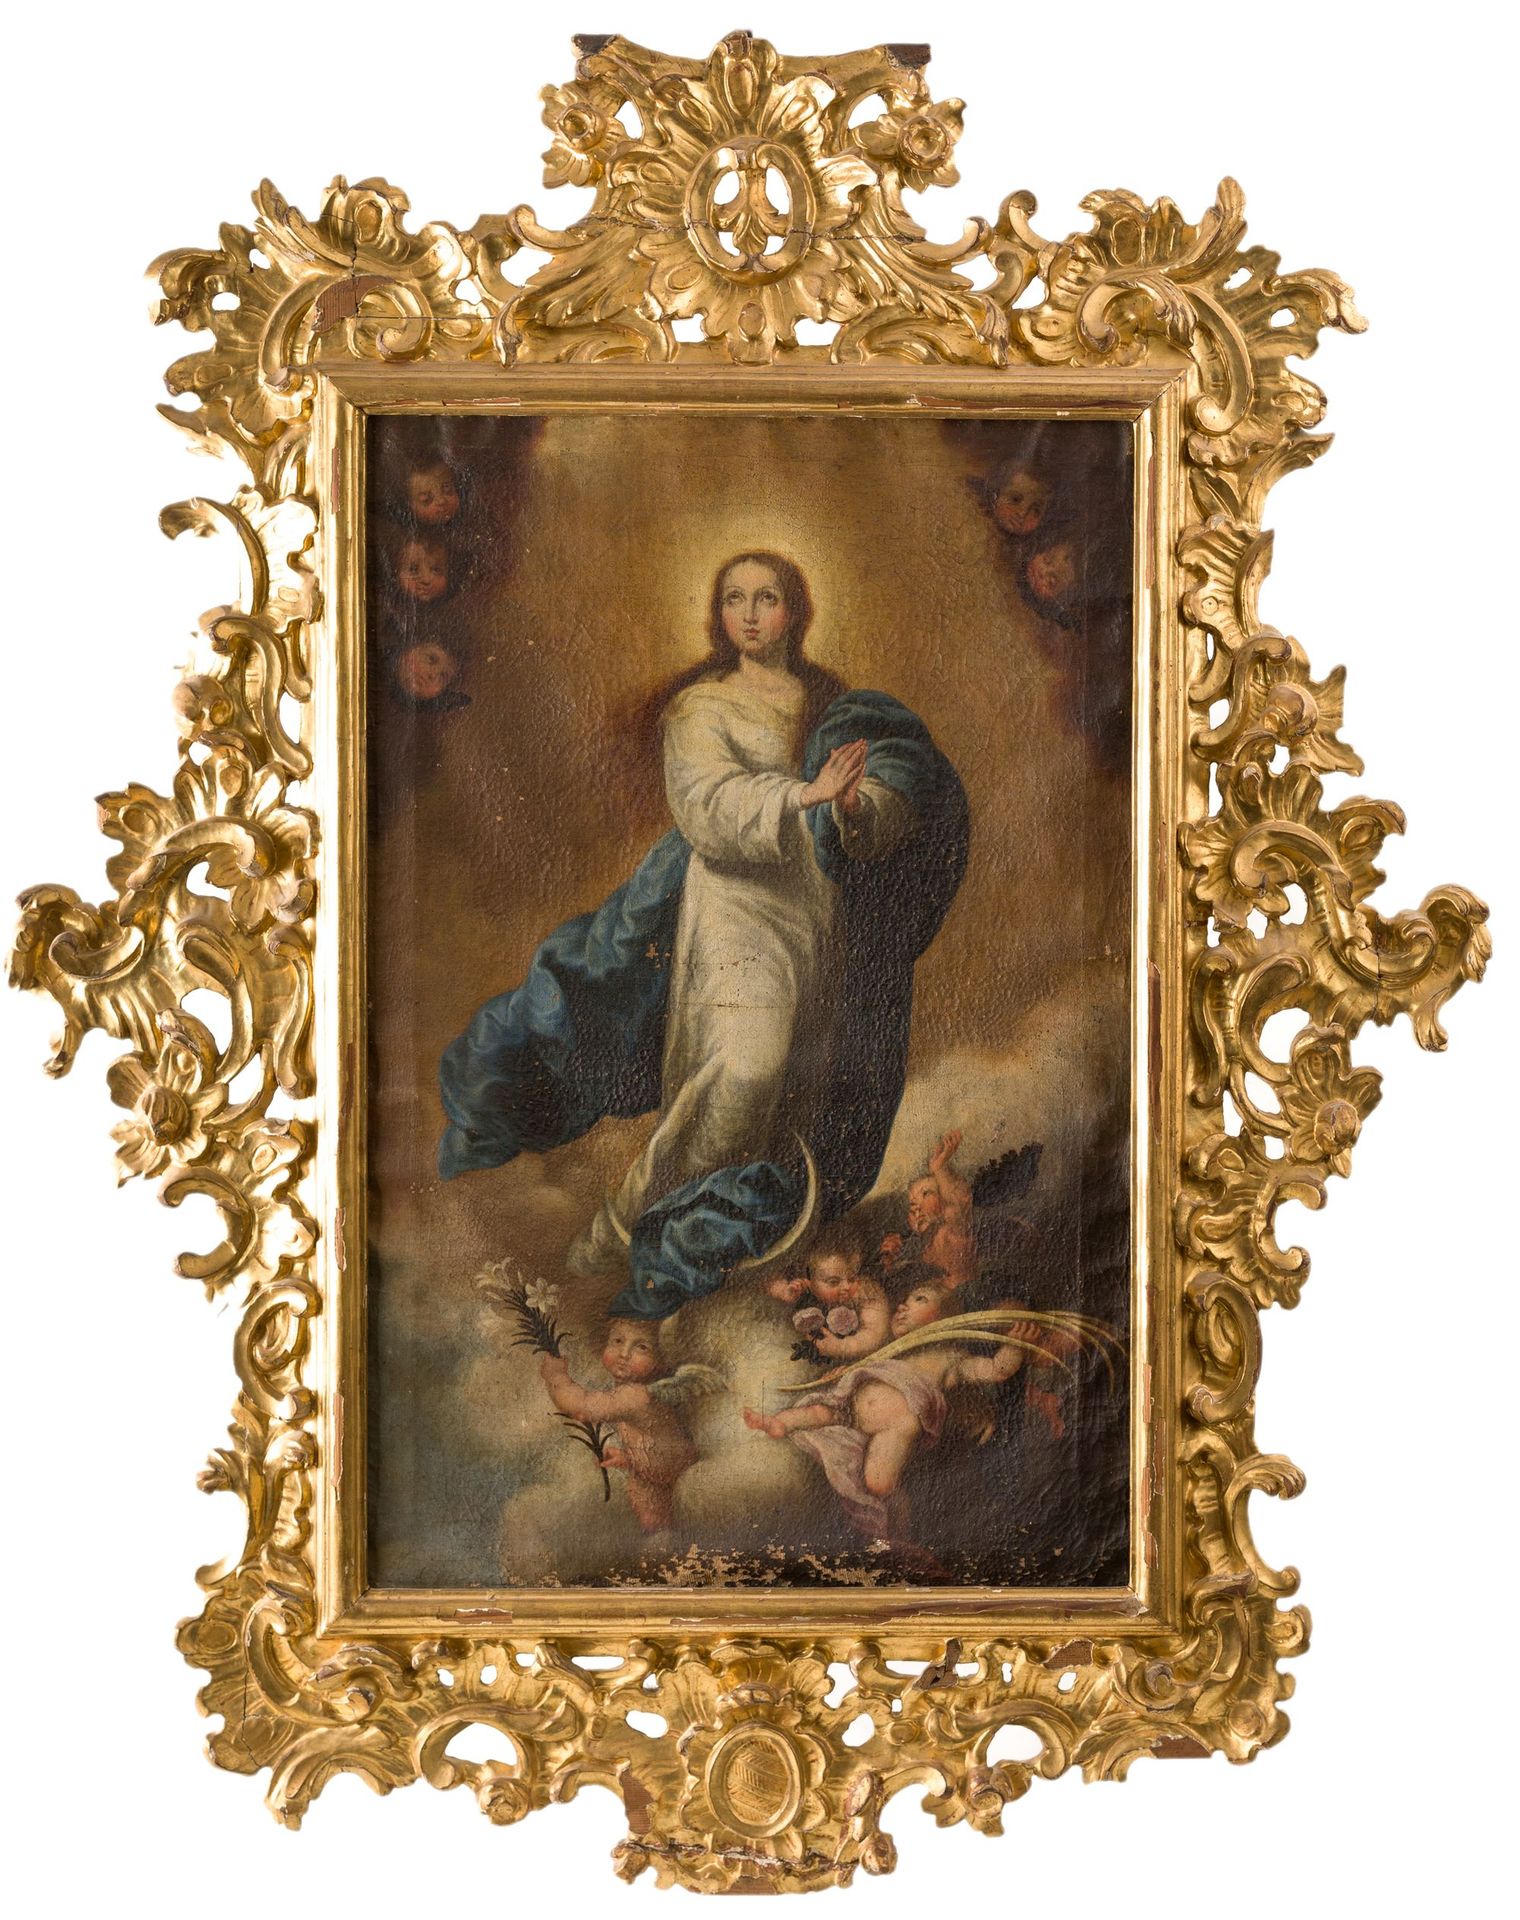 SPANISH SCHOOL (C. 17th / C. 18th) "Immaculate Conception" in need of restoratio&hellip;